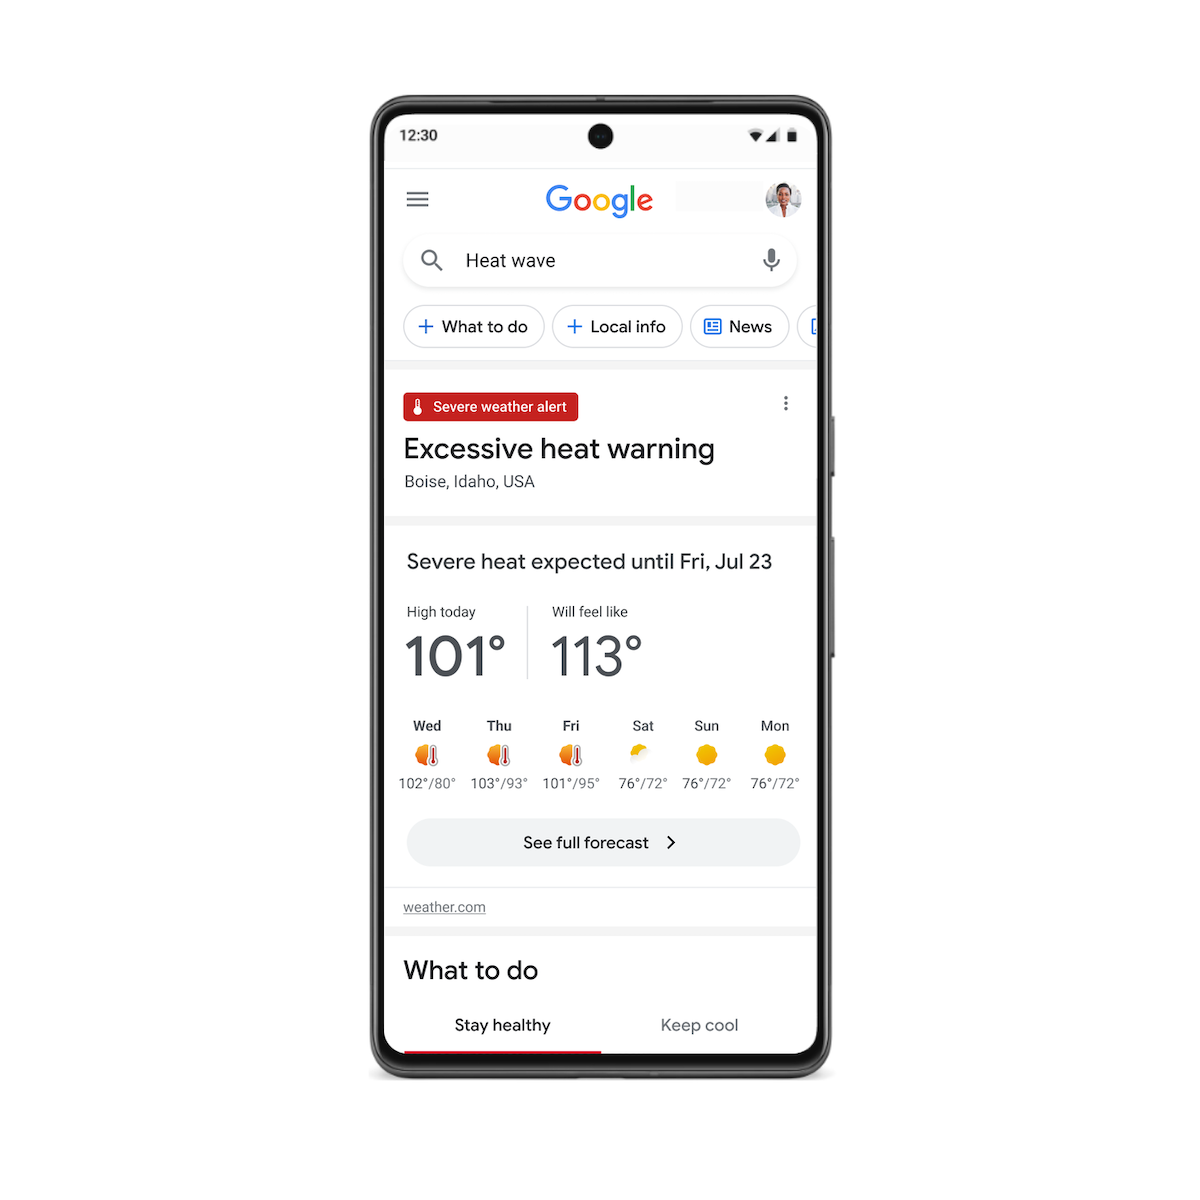 Google has announced its new features, including a heat alert system, to help communities fight with climate change.